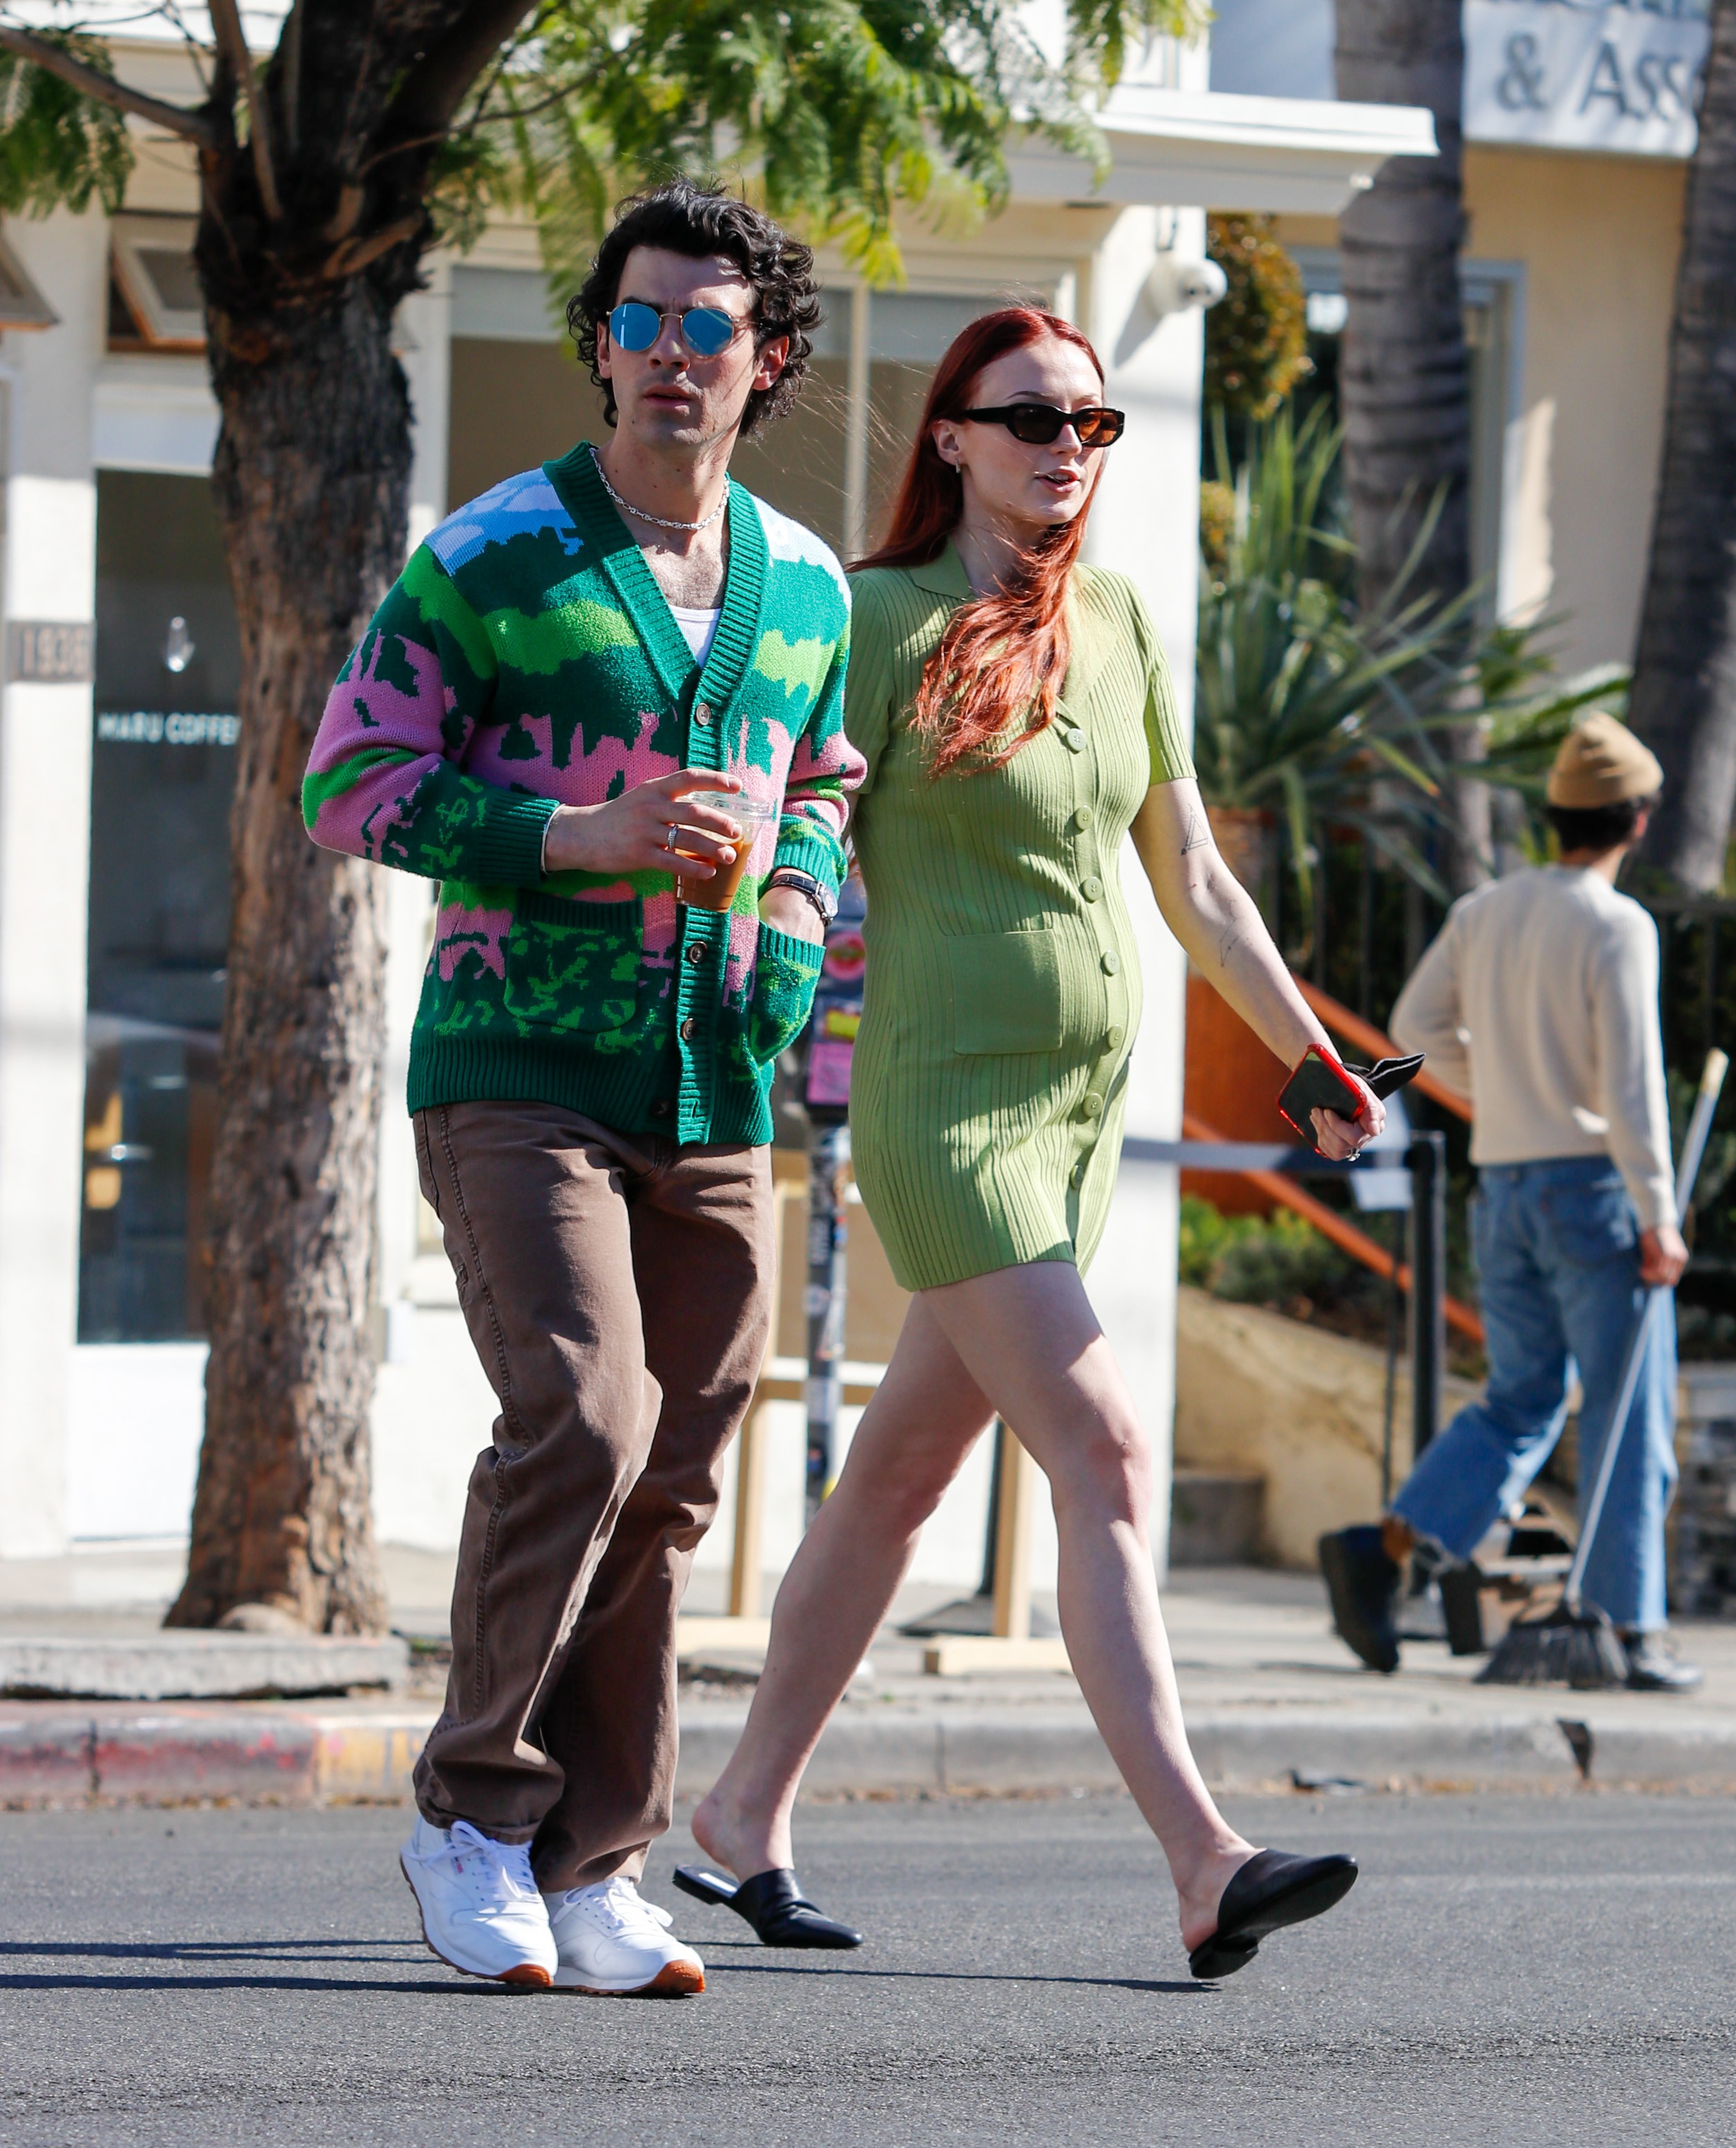 LOS ANGELES, CA - FEBRUARY 16: Joe Jonas and Sophie Turner are seen on February 16, 2022 in Los Angeles, California.  (Photo by BG005/Bauer-Griffin/GC Images) (Foto: GC Images)